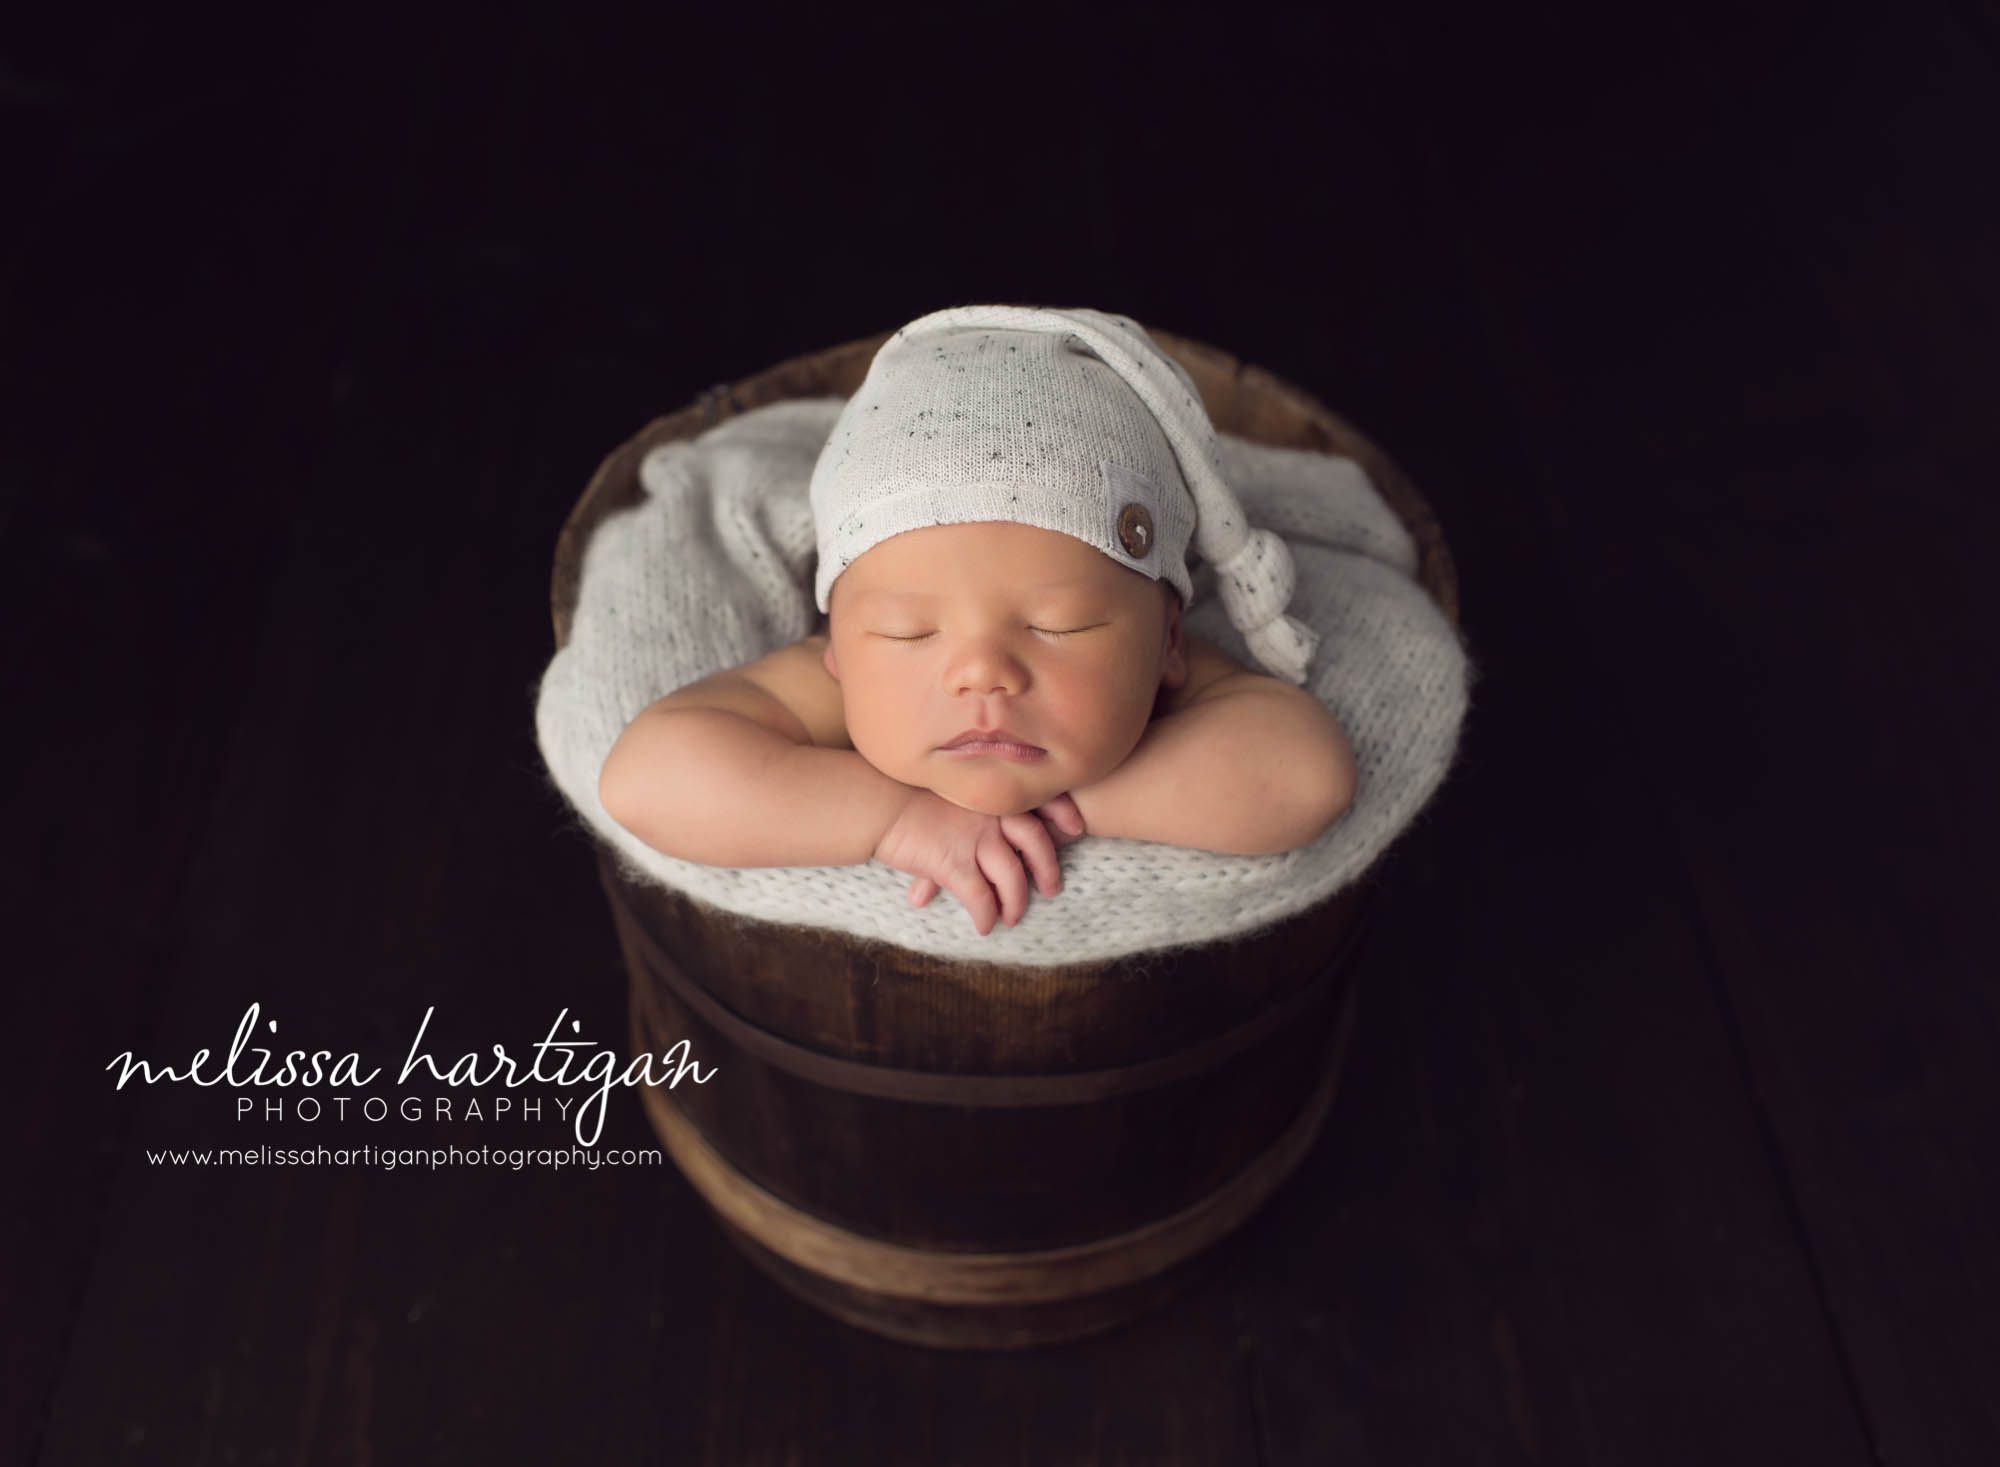 Melissa Hartigan Photography Maternity and Newborn Connecticut Photographer Lucas Newborn Session Baby boy sleeping in wooden bucket with knit blanket and knit hat